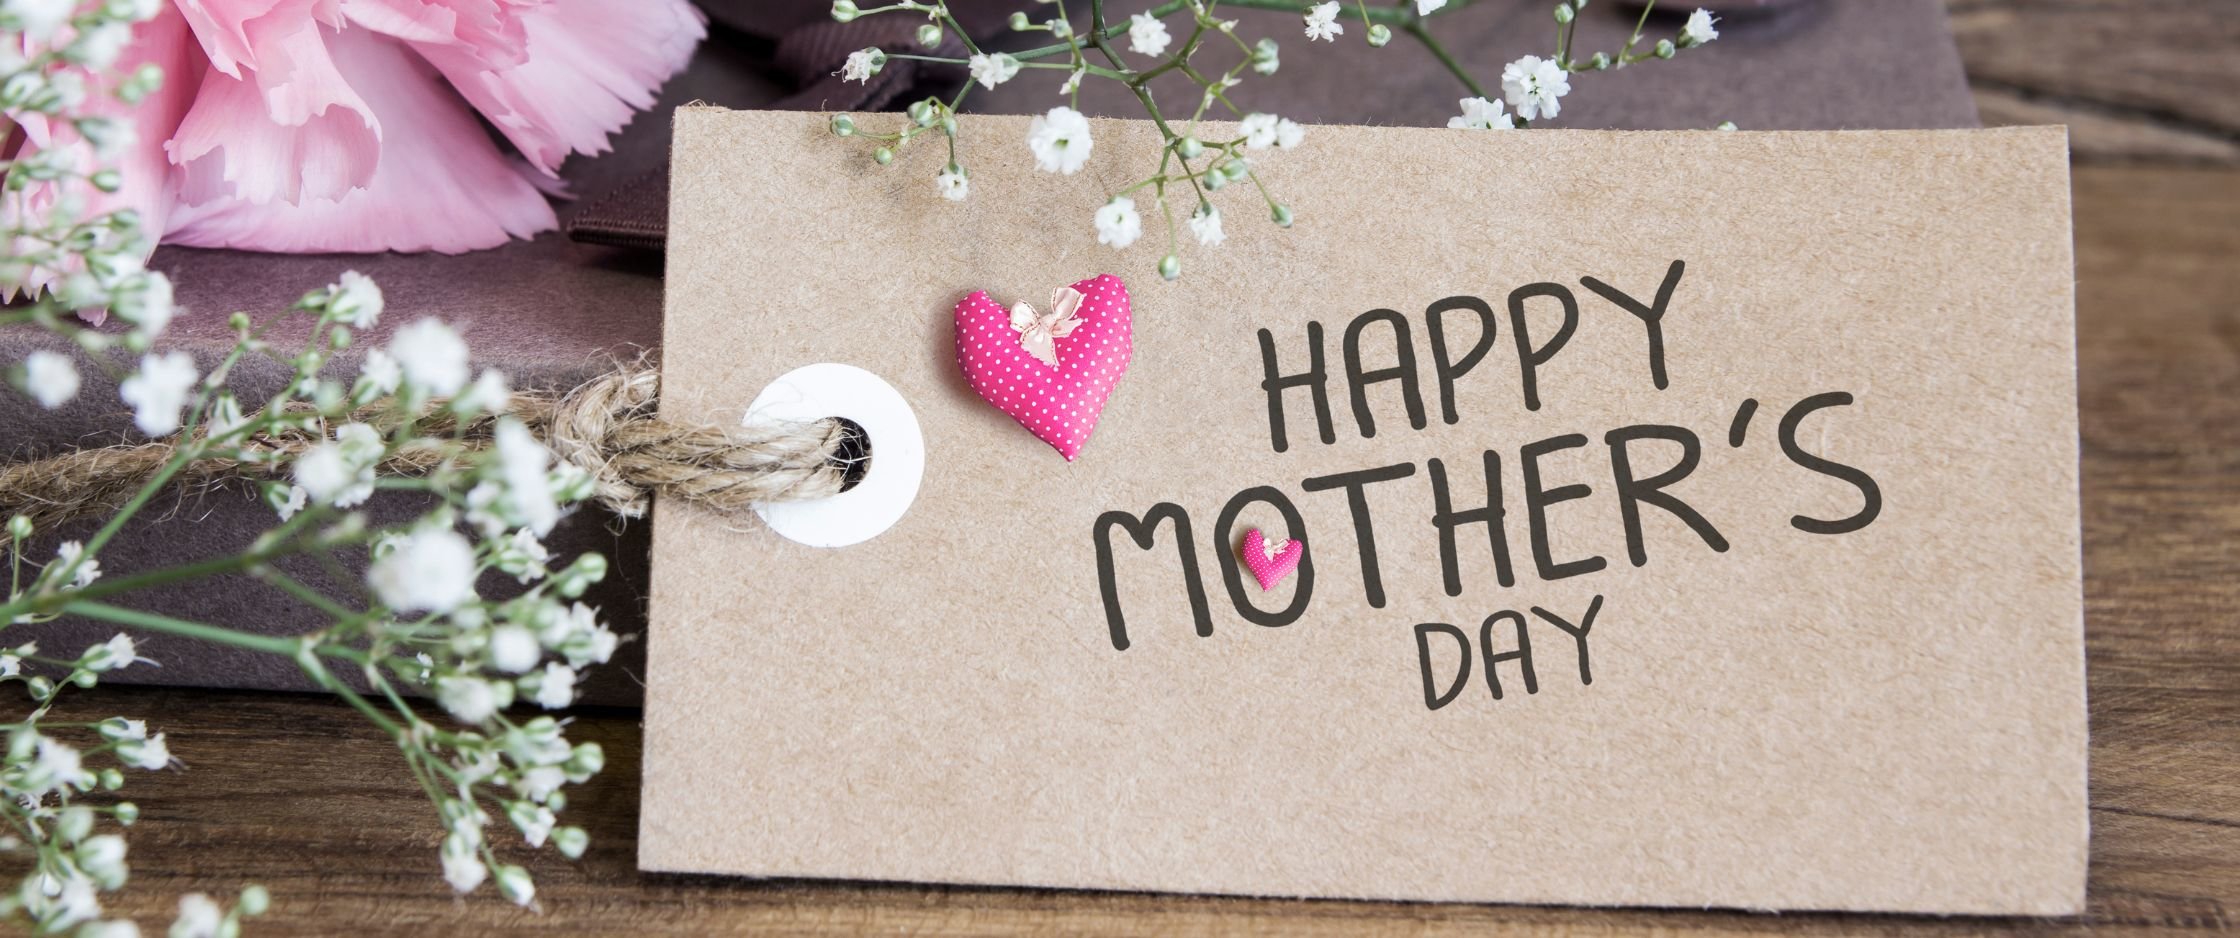 Today is Mother’s Day!